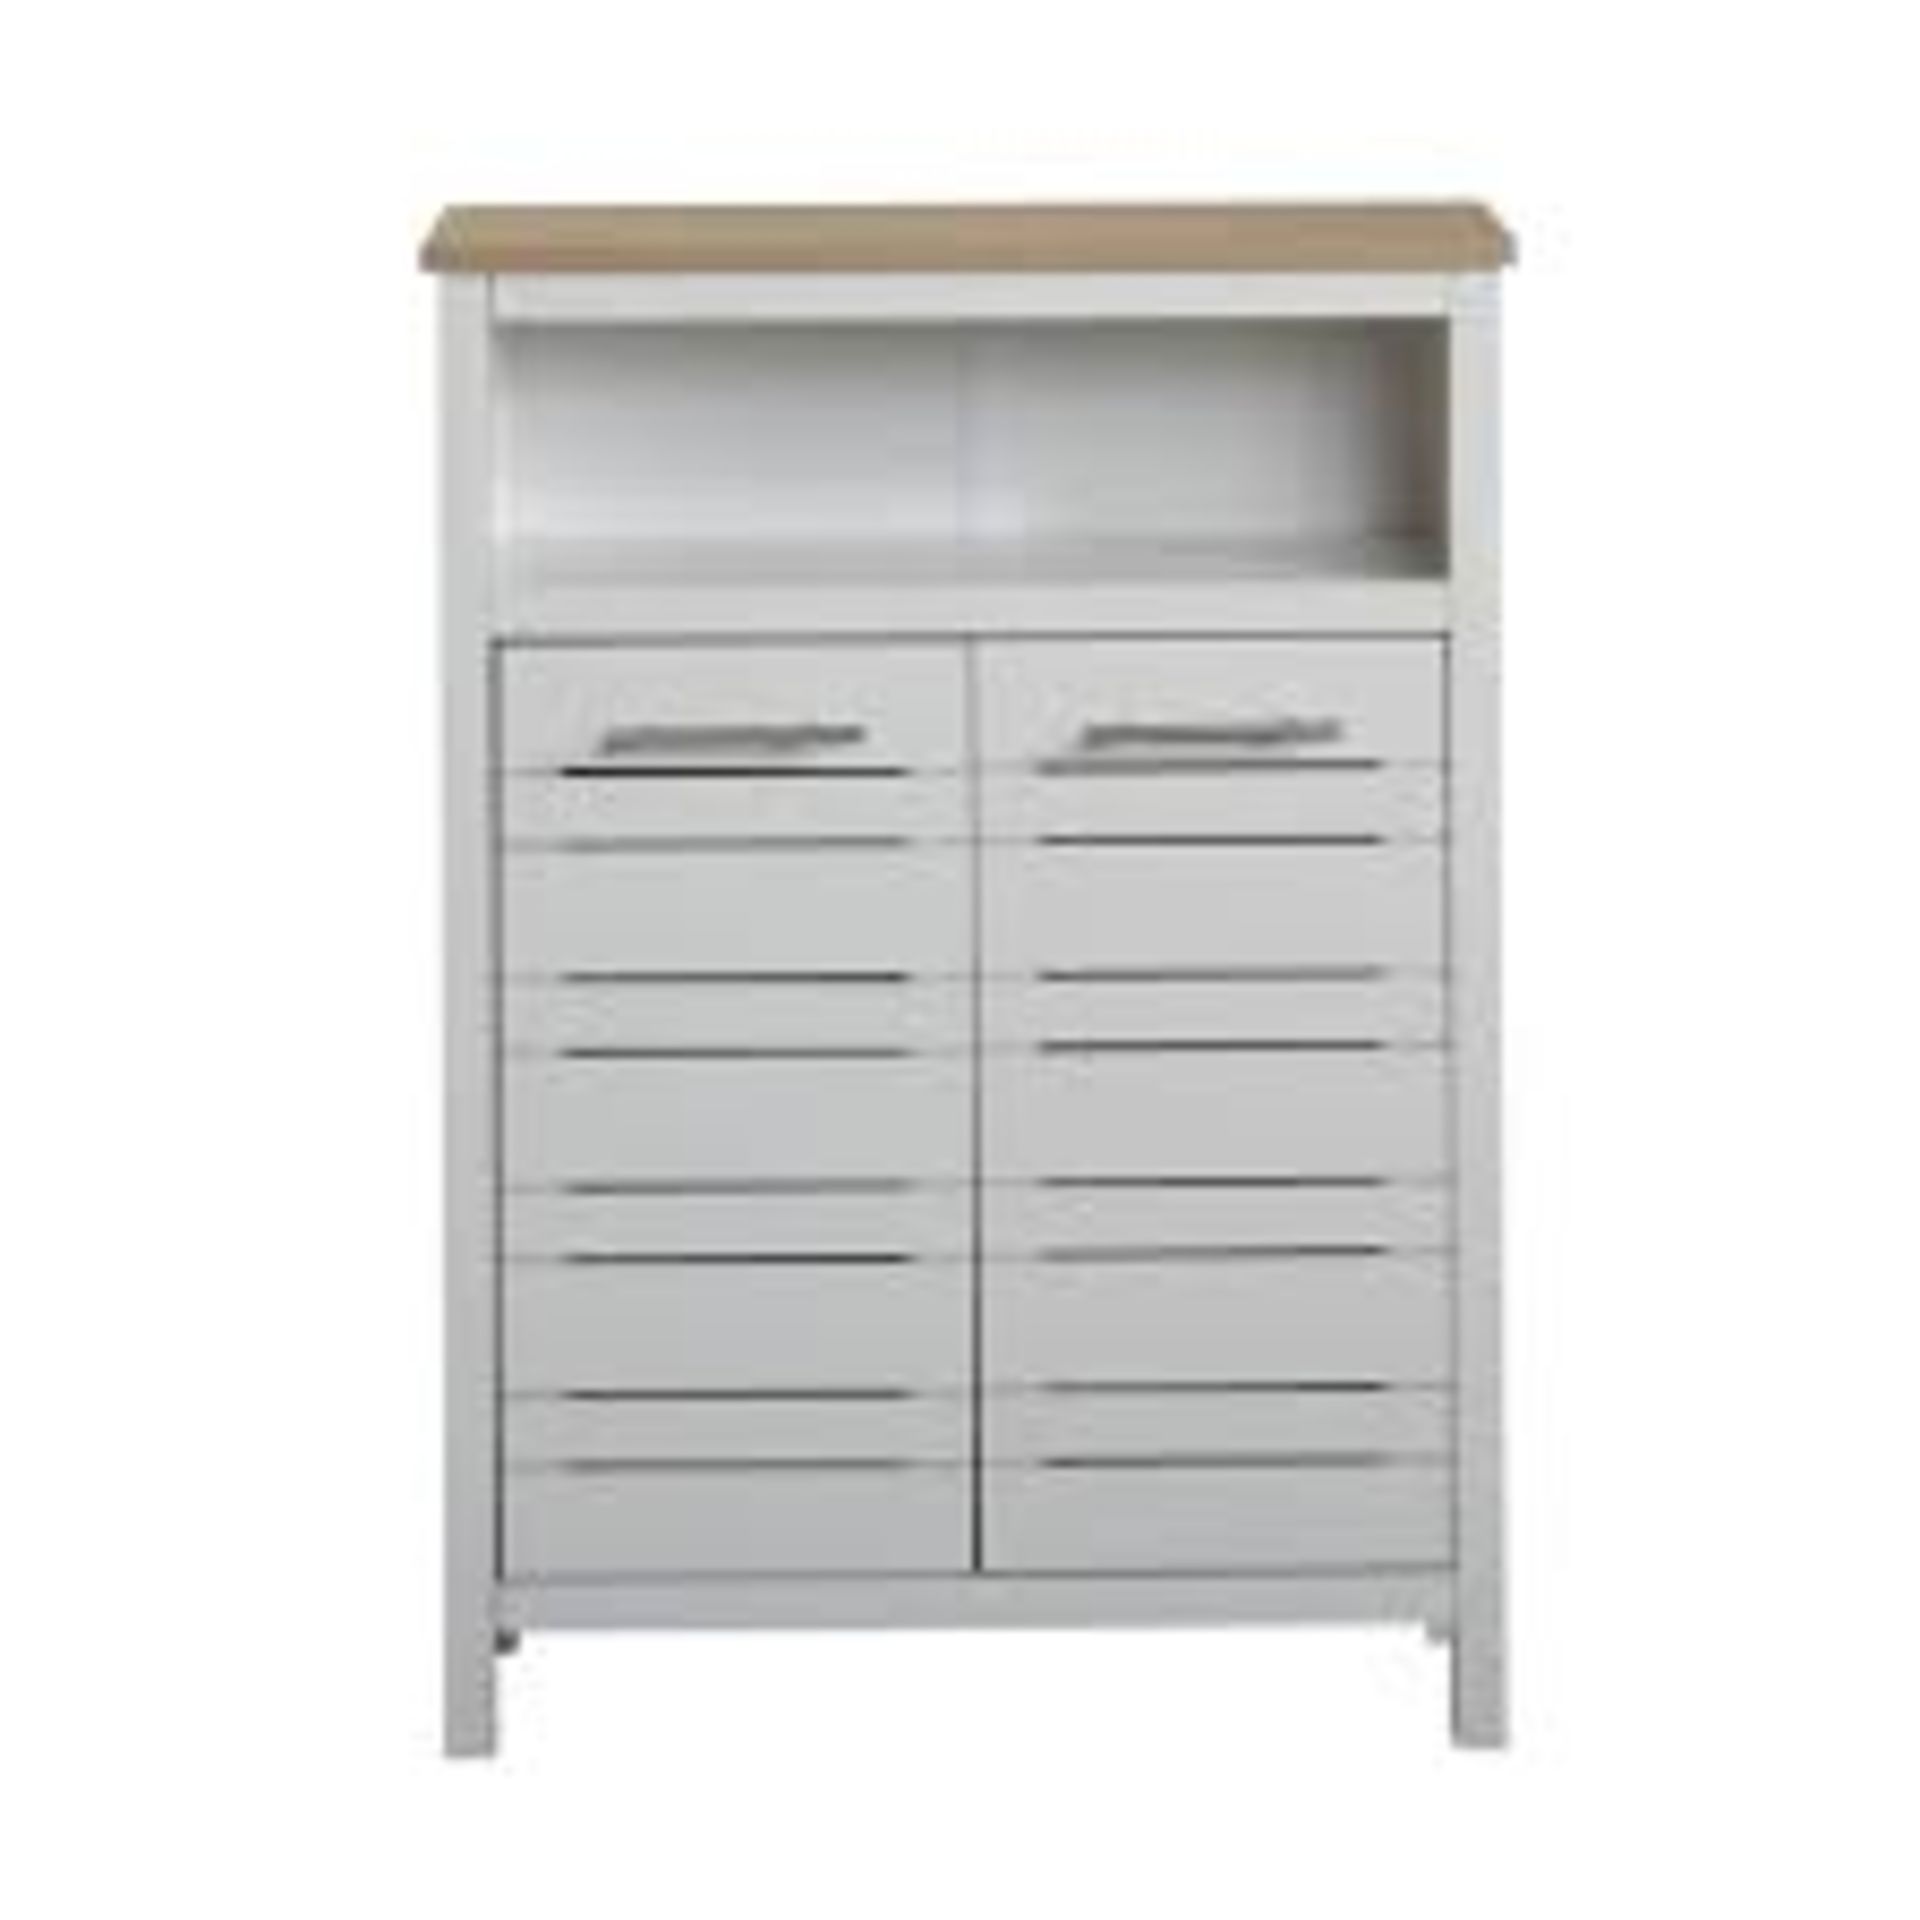 PALLET TO CONTAIN 12 x NEW BOXED Hertford Two-Tone White Double Door Storage Unit. The Two-Toned